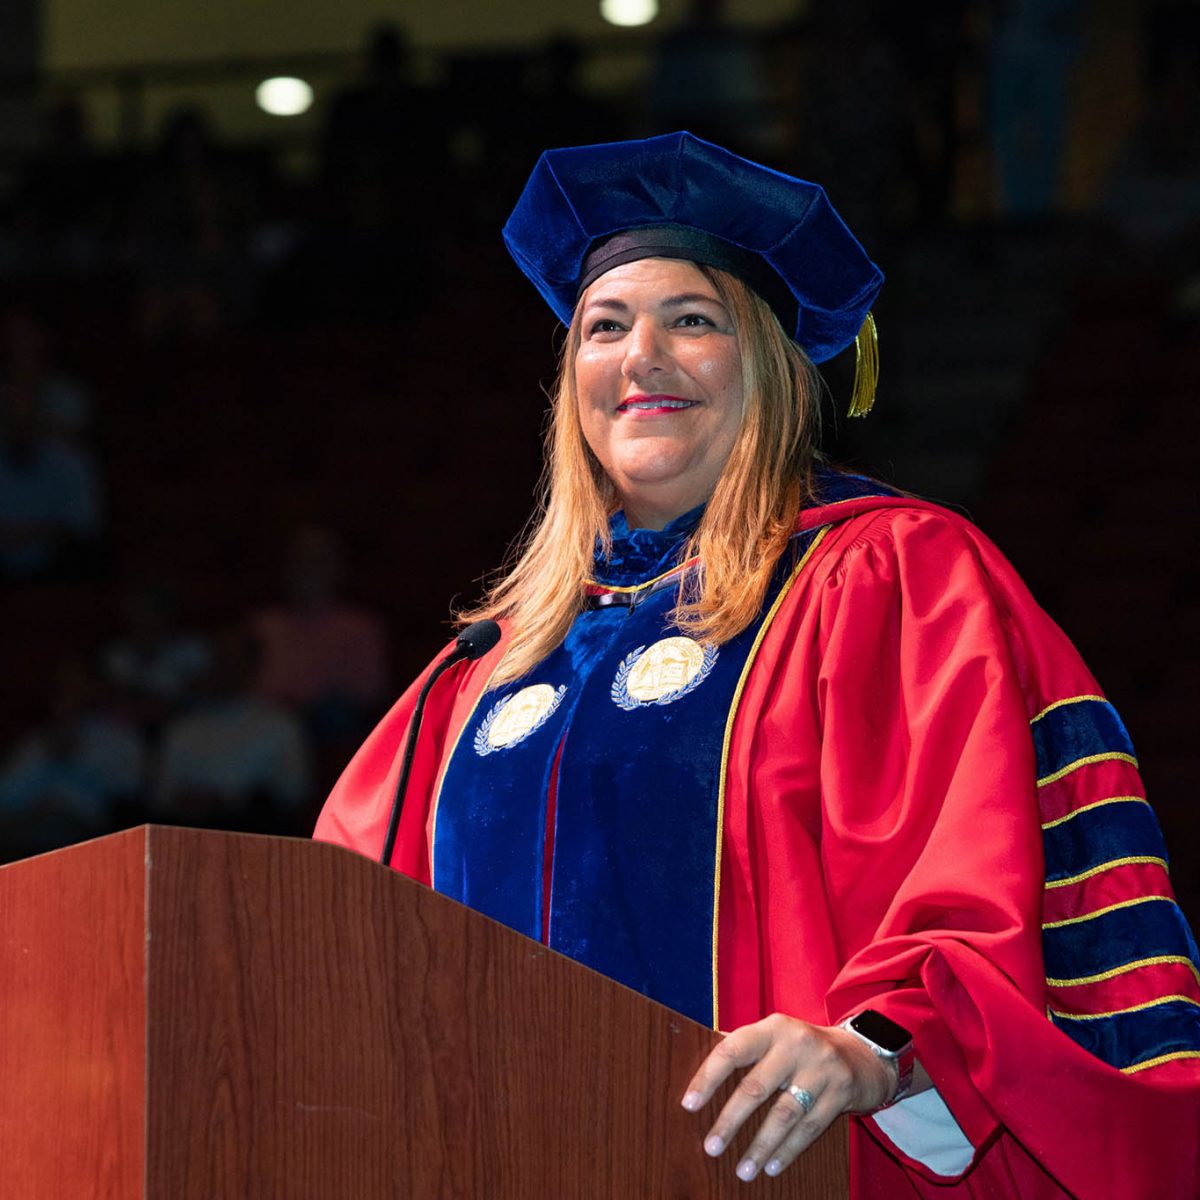 Madeline Pumariega, the first female president of Miami Dade College (MDC) and former executive vice president and provost of Tallahassee Community College, made her comments as the keynote speaker at two summer commencement ceremonies Friday, Aug. 4, at the Donald L. Tucker Civic Center. (FSU Photography Services)